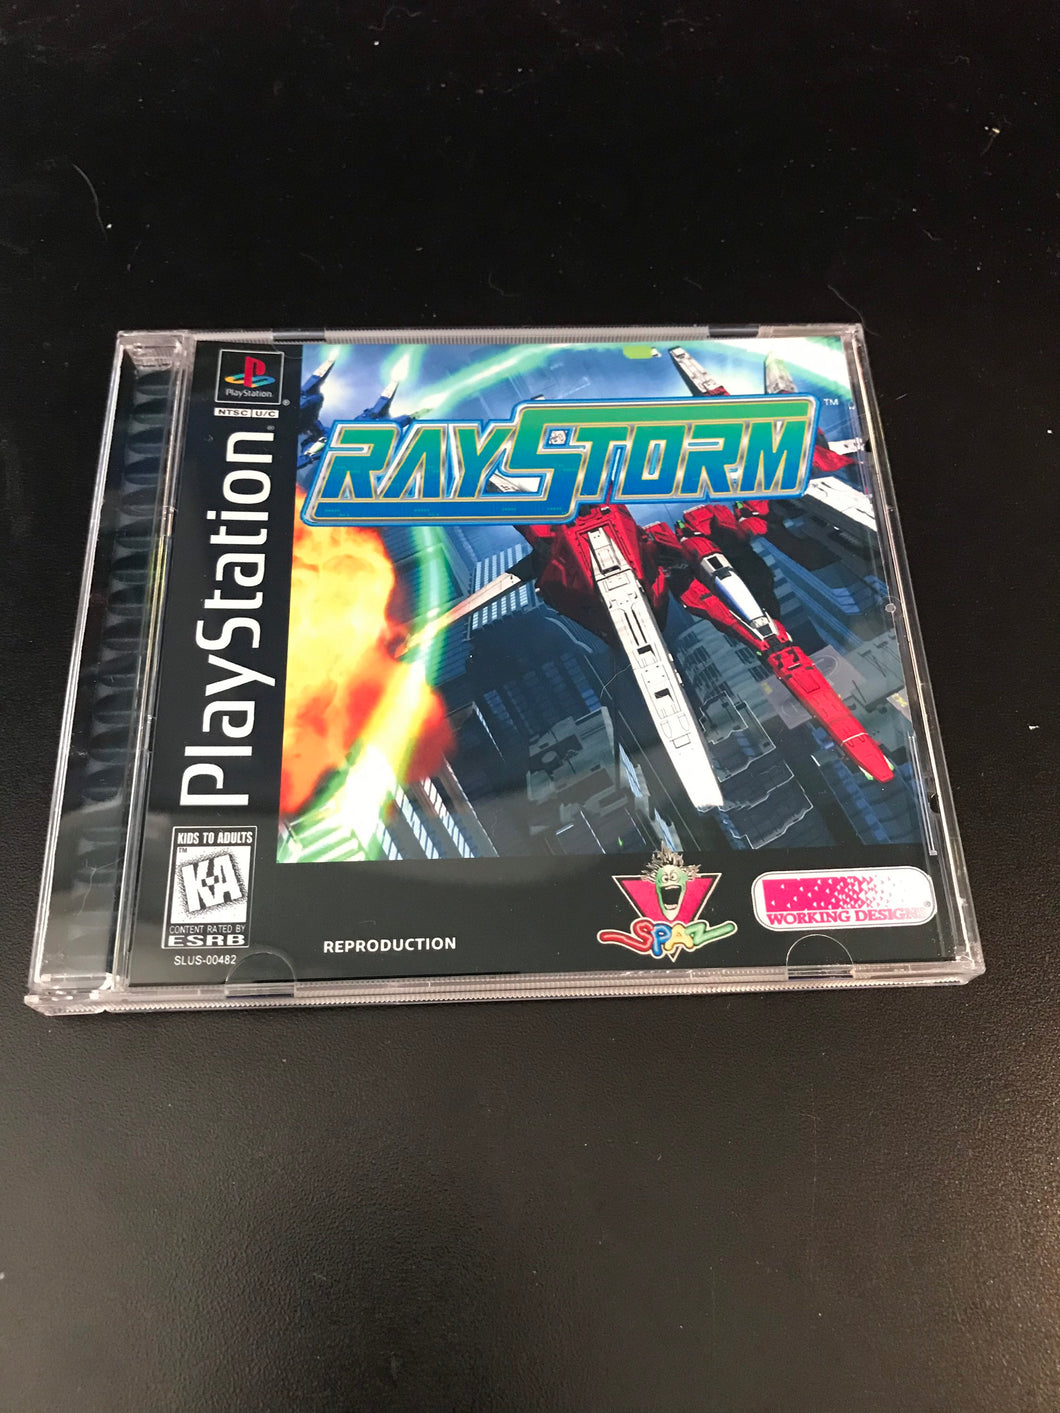 RayStorm PS1 Reproduction Case